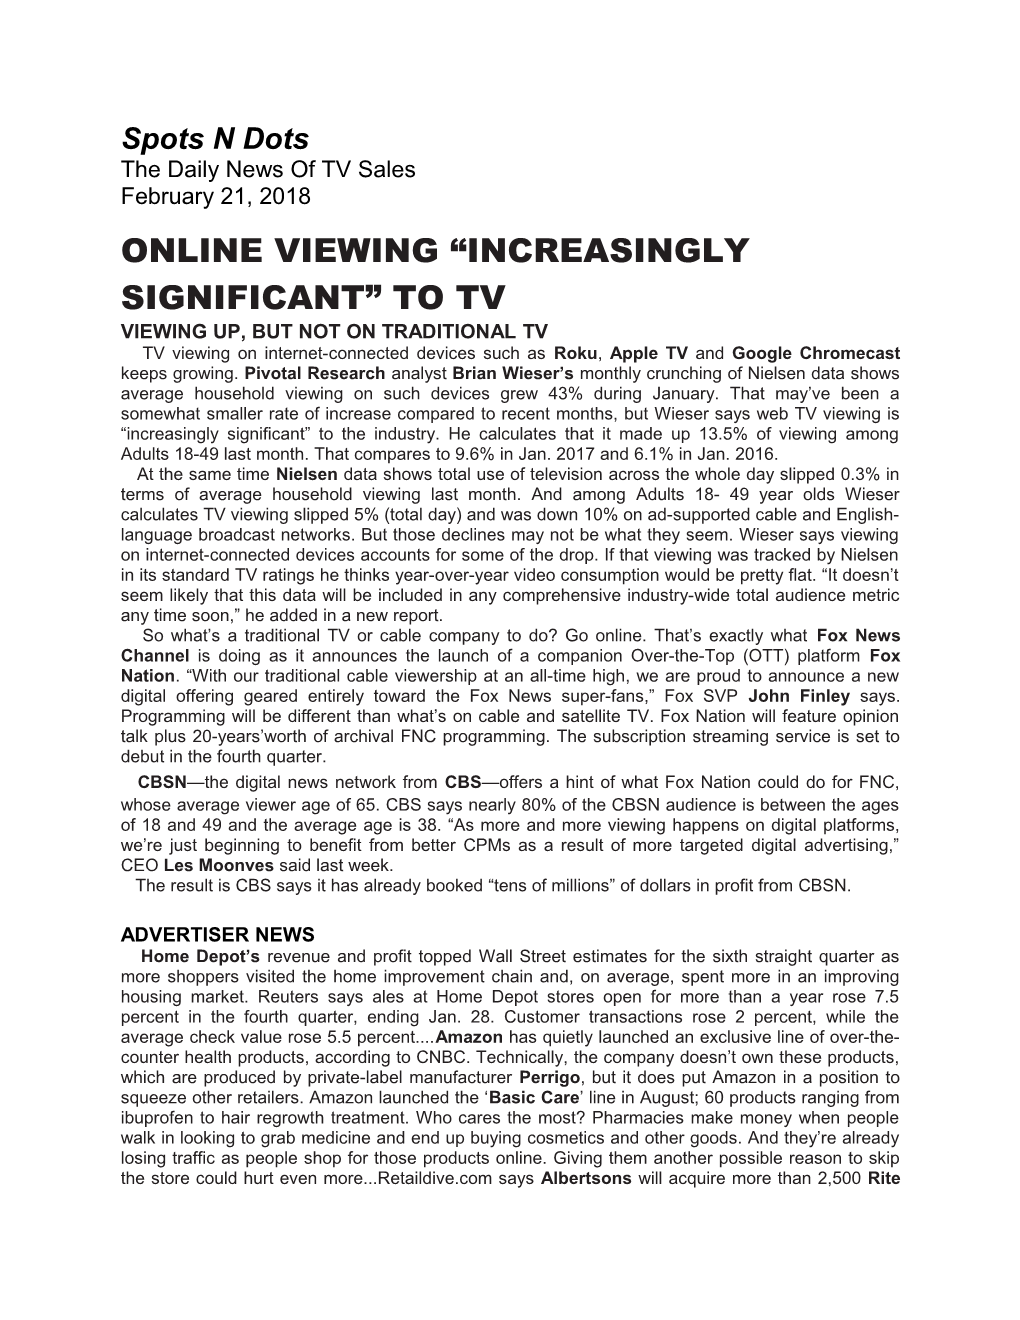 Online Viewing Increasingly Significant to Tv